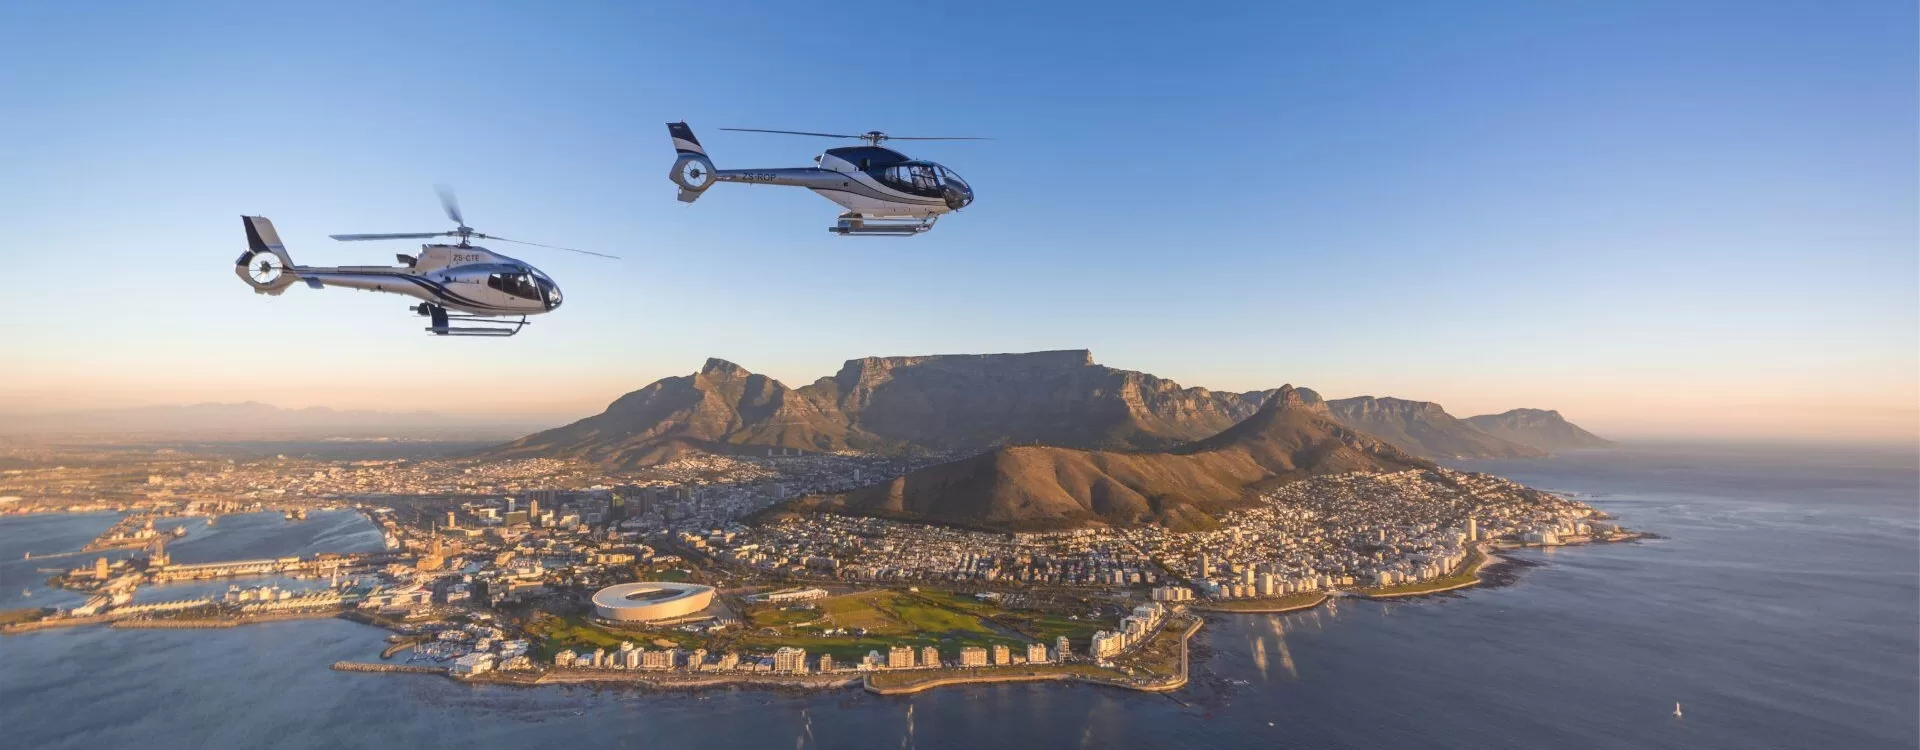 Cape Town Helicopter Rides